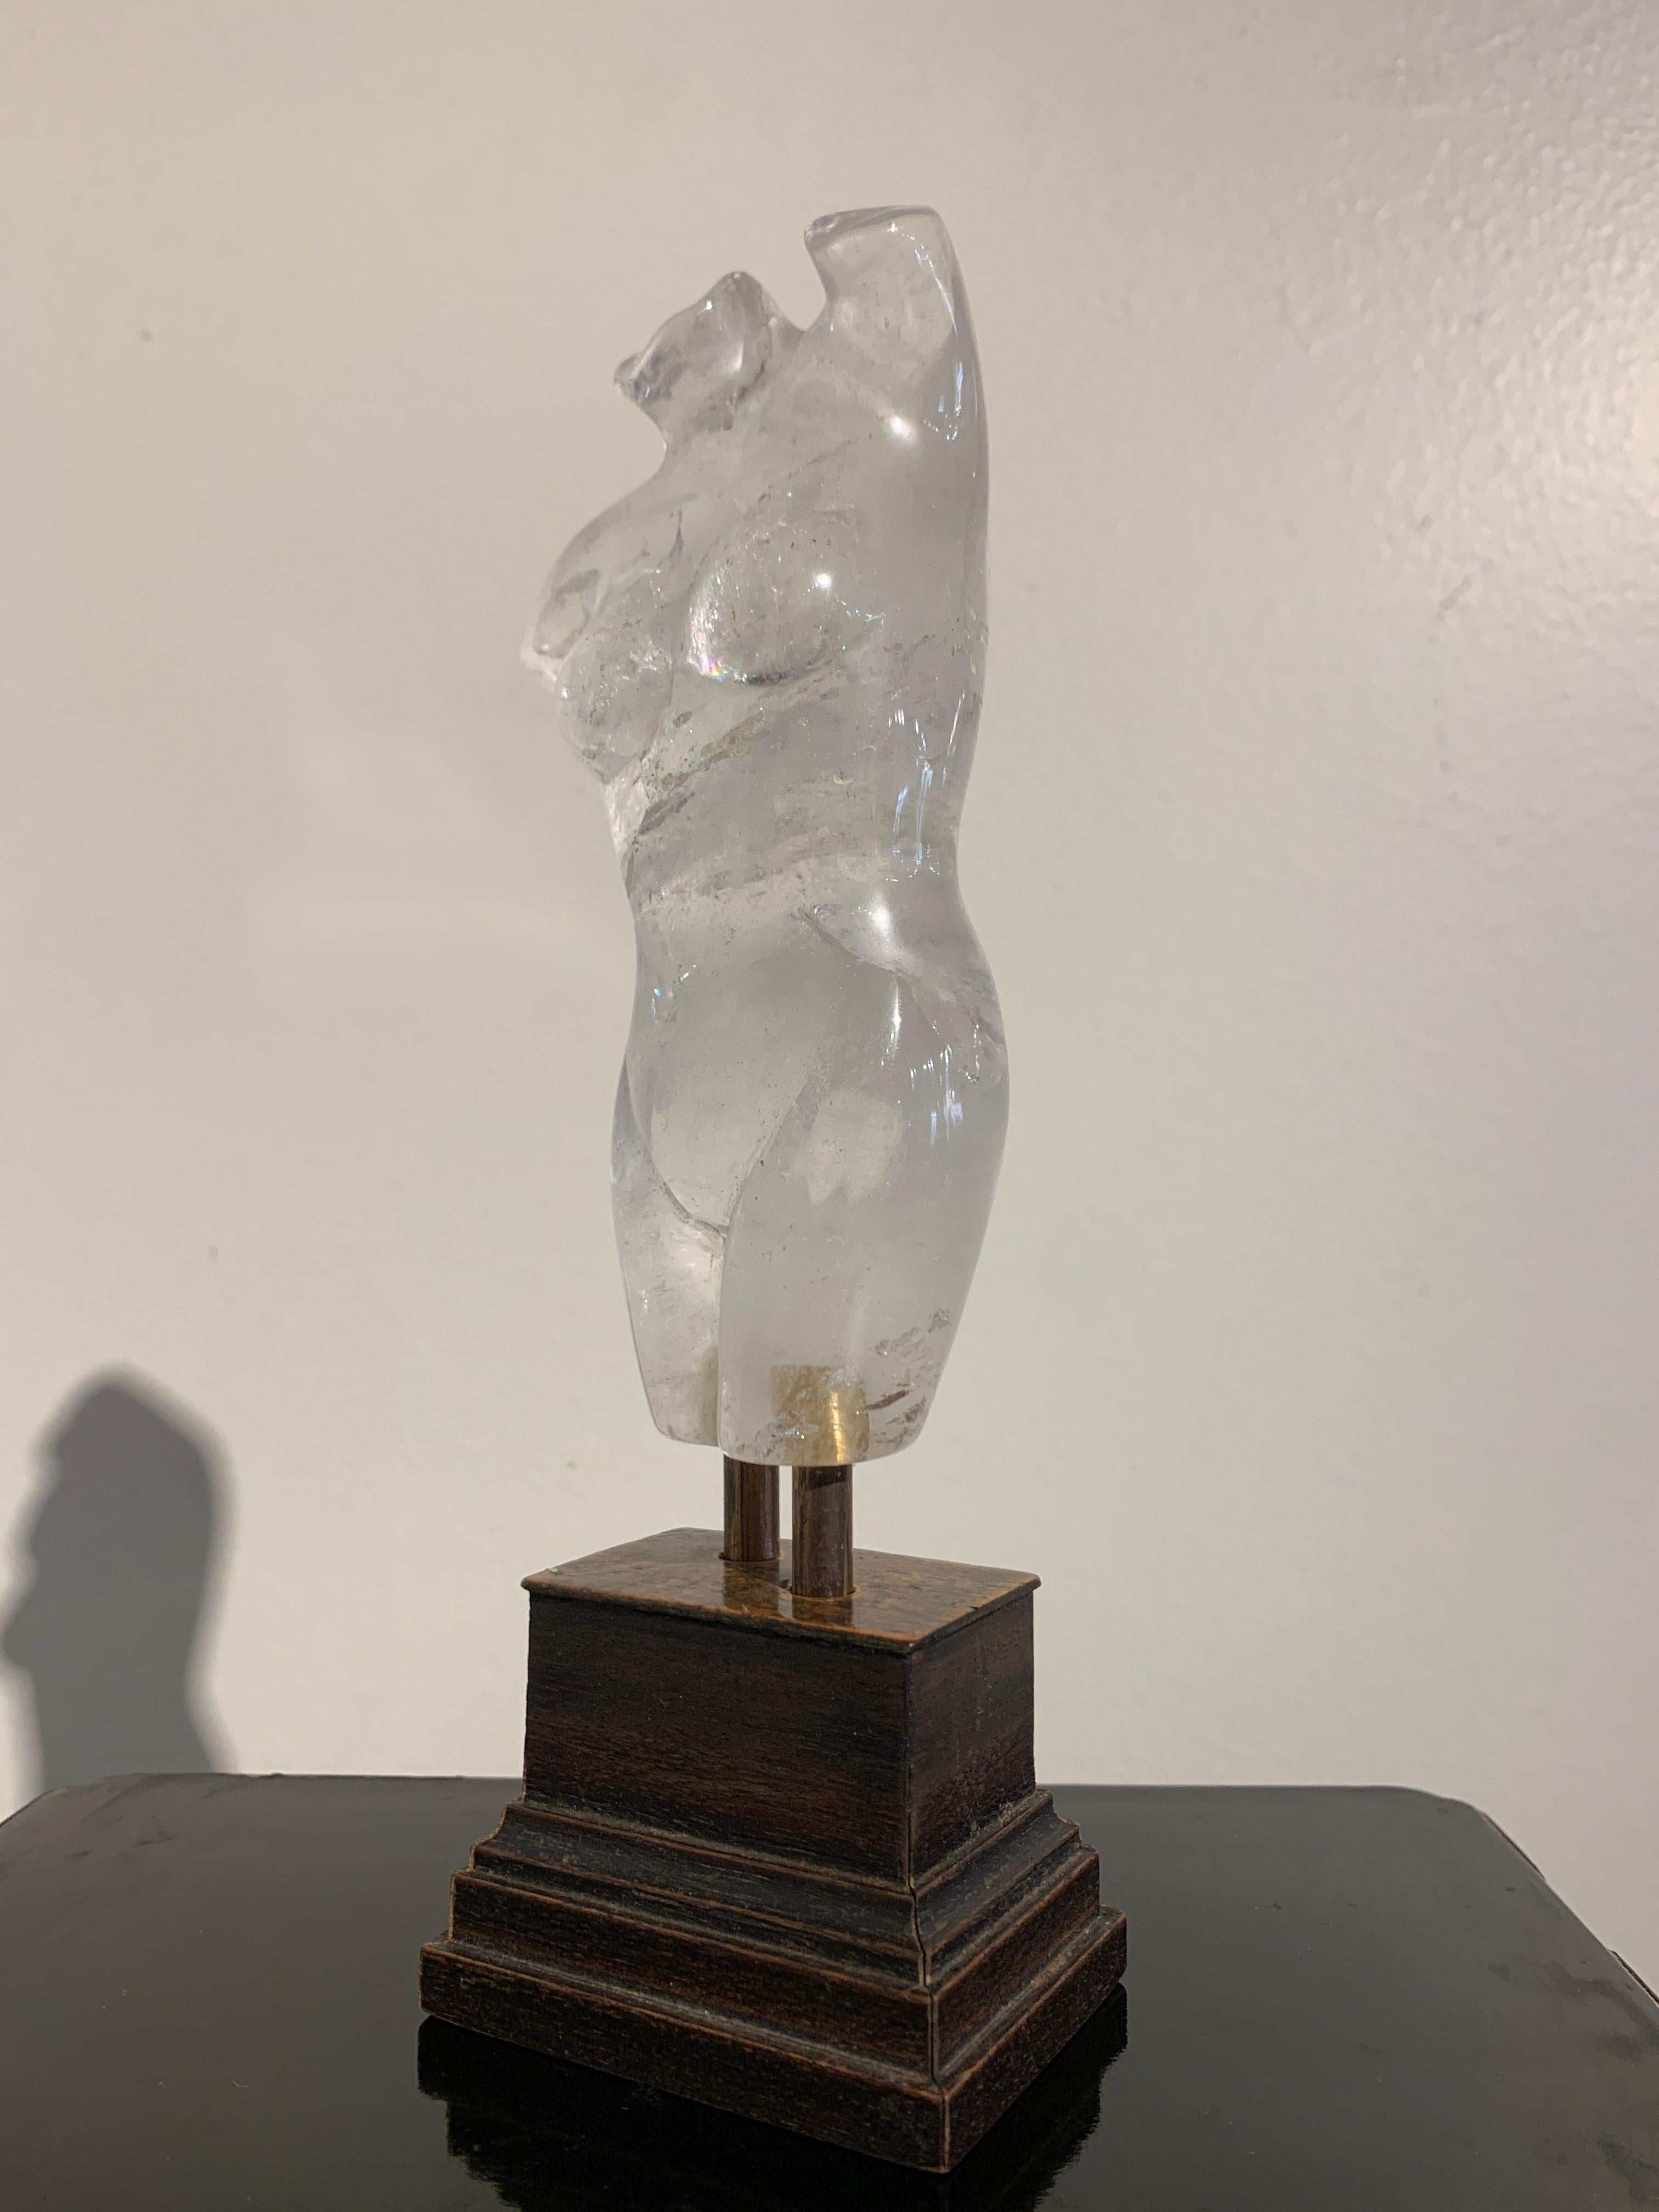 A beautiful carved and polished small rock crystal figure of Venus, probably Italy, carved after the antique, early to mid-20th century.

The naked torso, almost certainly depicting Venus, the goddess of love and beauty, features a voluptuous